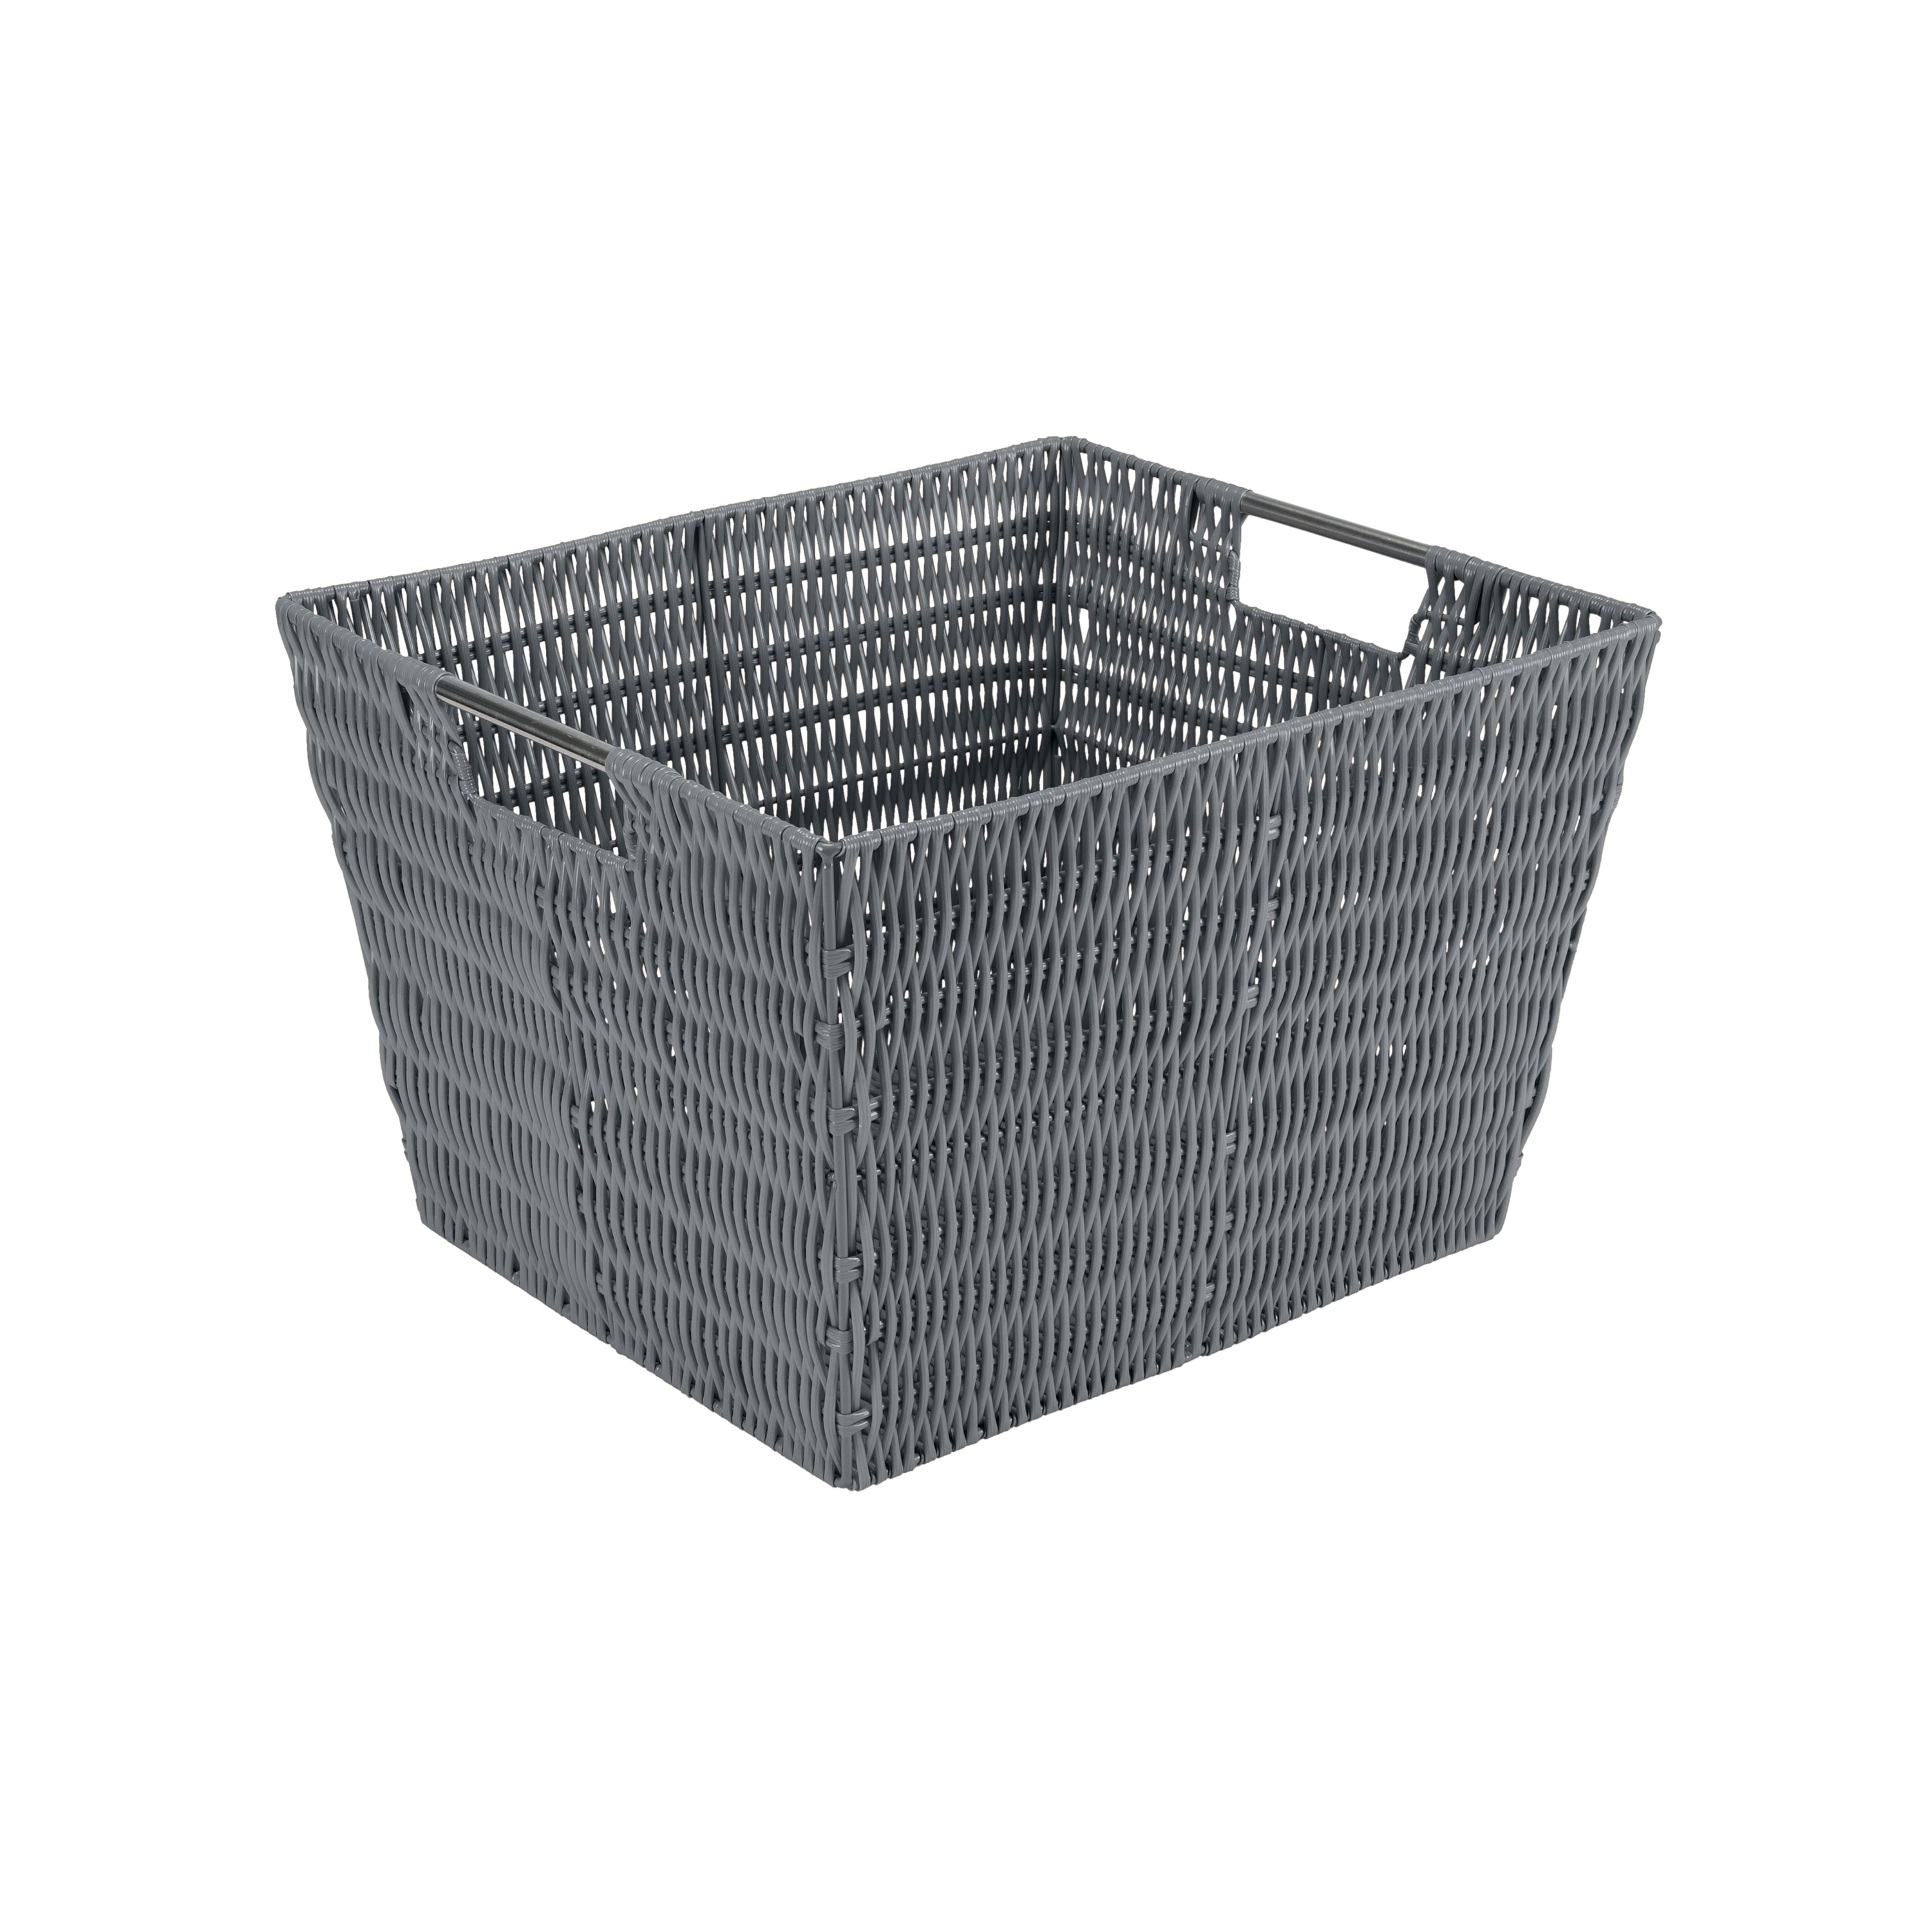 https://ak1.ostkcdn.com/images/products/is/images/direct/c52815e93b905468a825a7ce9ec9c3d216bf131a/Simplify-Large-Rattan-Storage-Tote-Basket-in-Charcoal.jpg